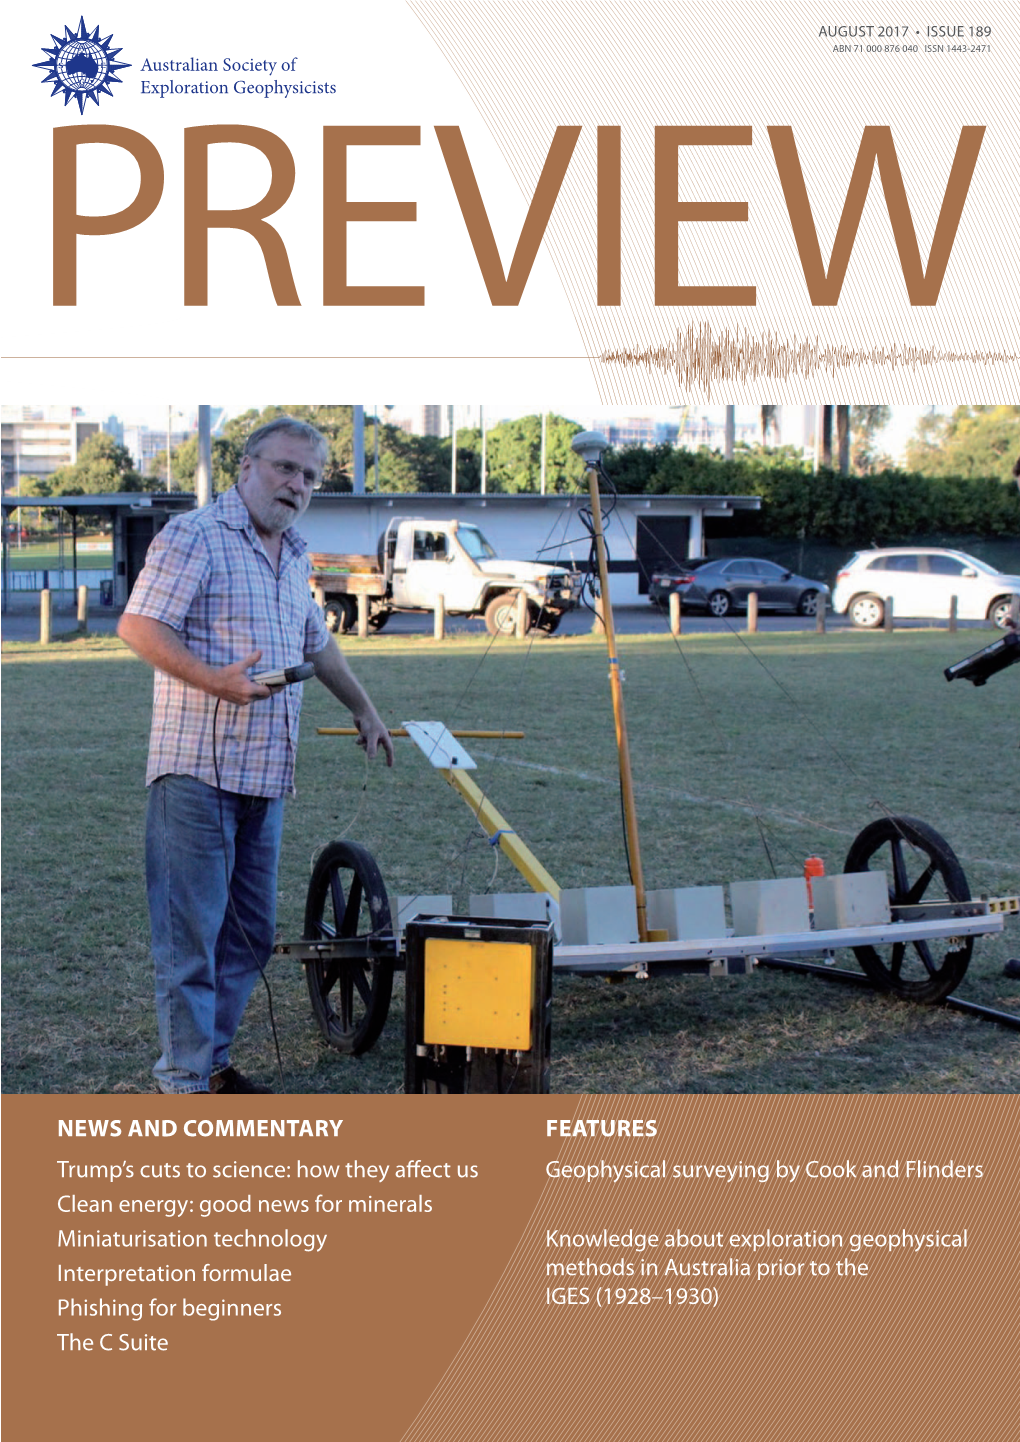 FEATURES Geophysical Surveying by Cook and Flinders Knowledge